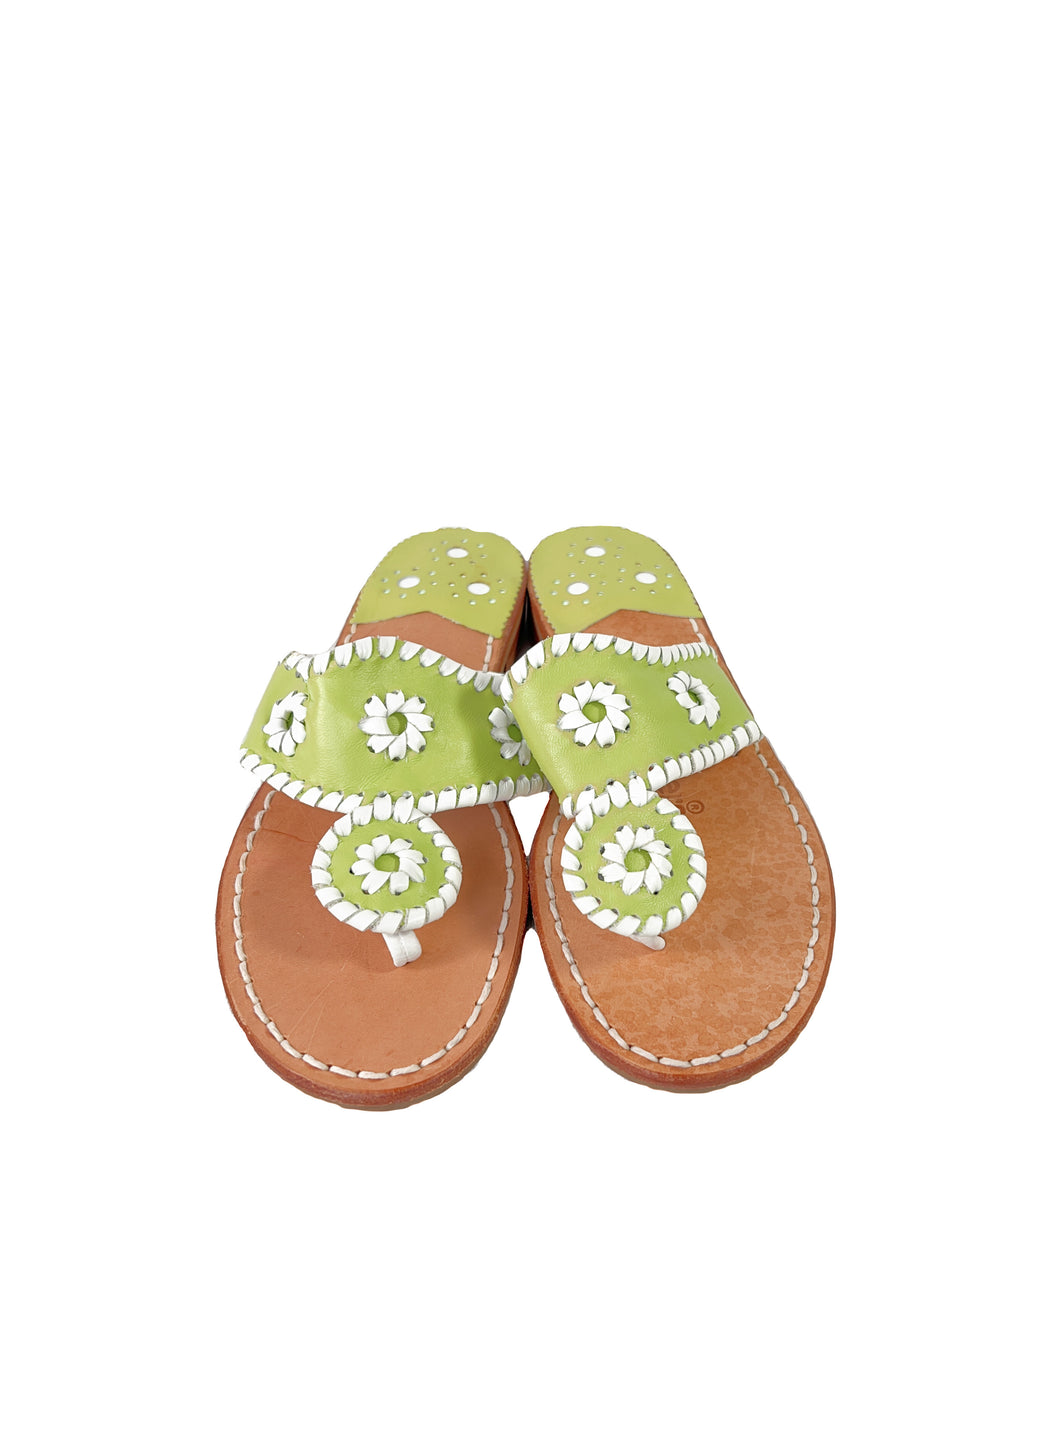 Jack Rogers lime and white leather flip flops size 5 NEW